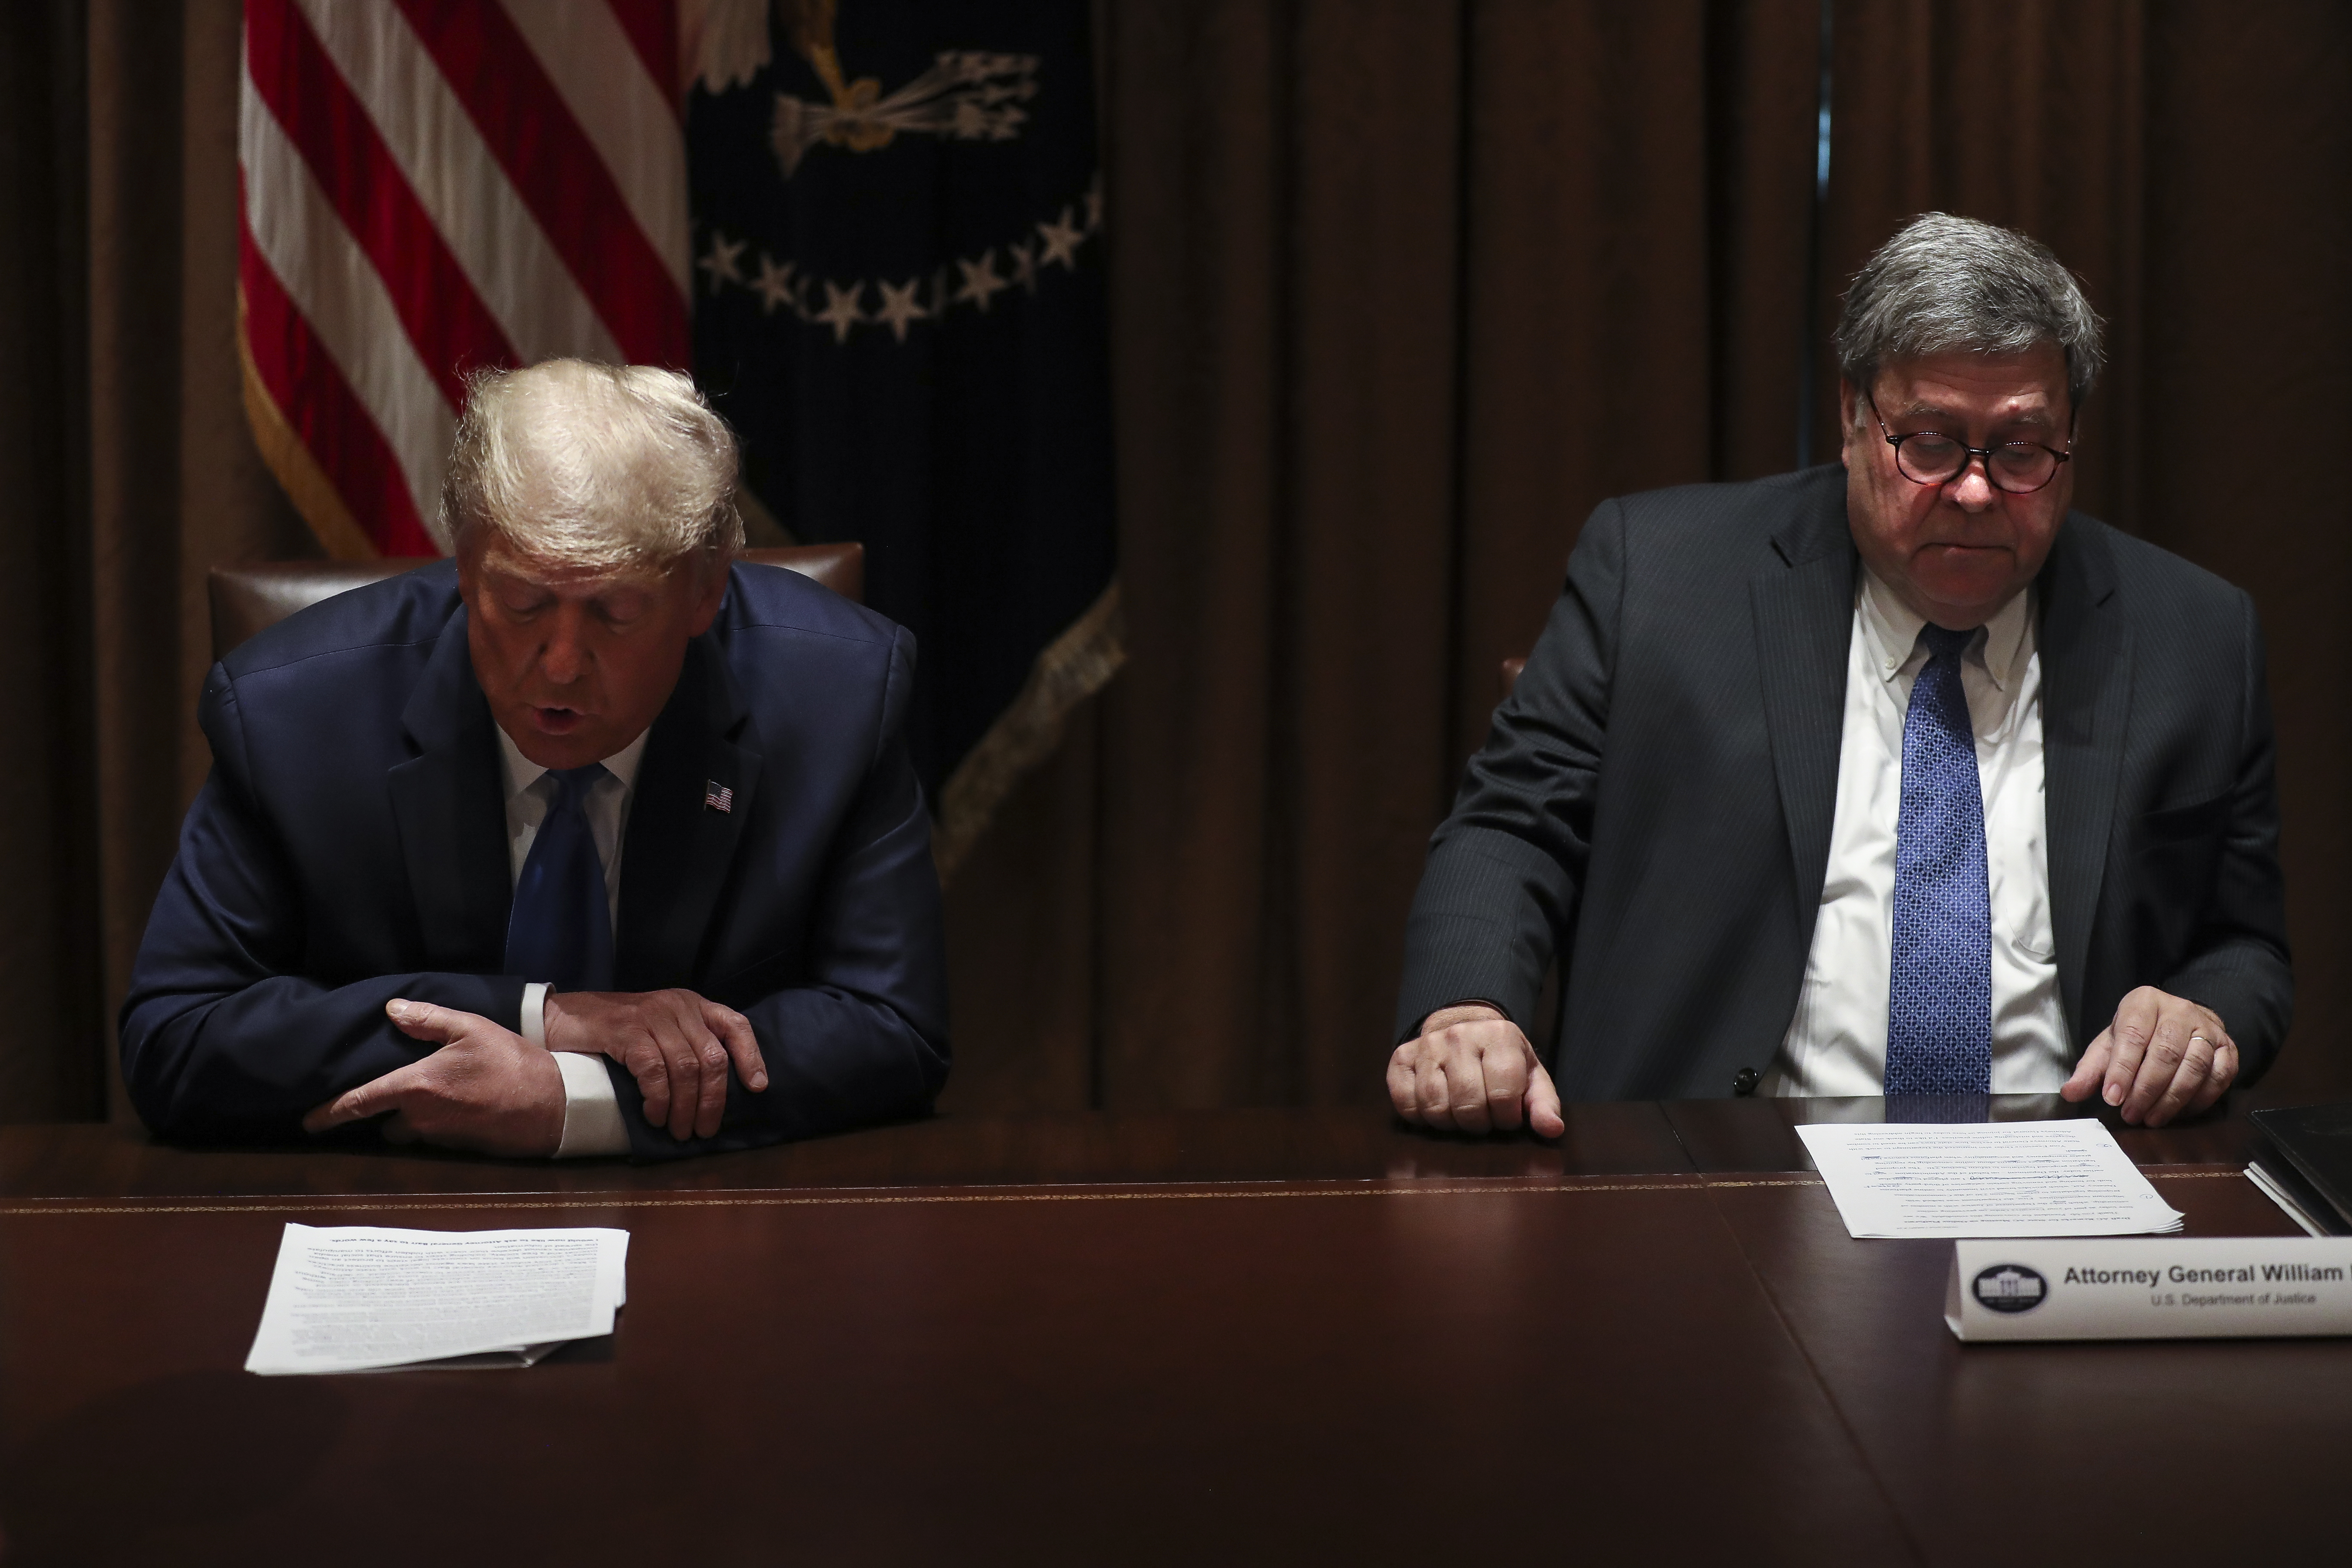 President Donald Trump speaks as US Attorney General William Barr listens during a discussion with State Attorneys General on Protecting Consumers from Social Media Abuses in the Cabinet Room of the White House on Wednesday, Sep. 23, 2020 in Washington, DC.
(Photo by Oliver Contreras/For The New York Times)No Use UK. No Use Germany.